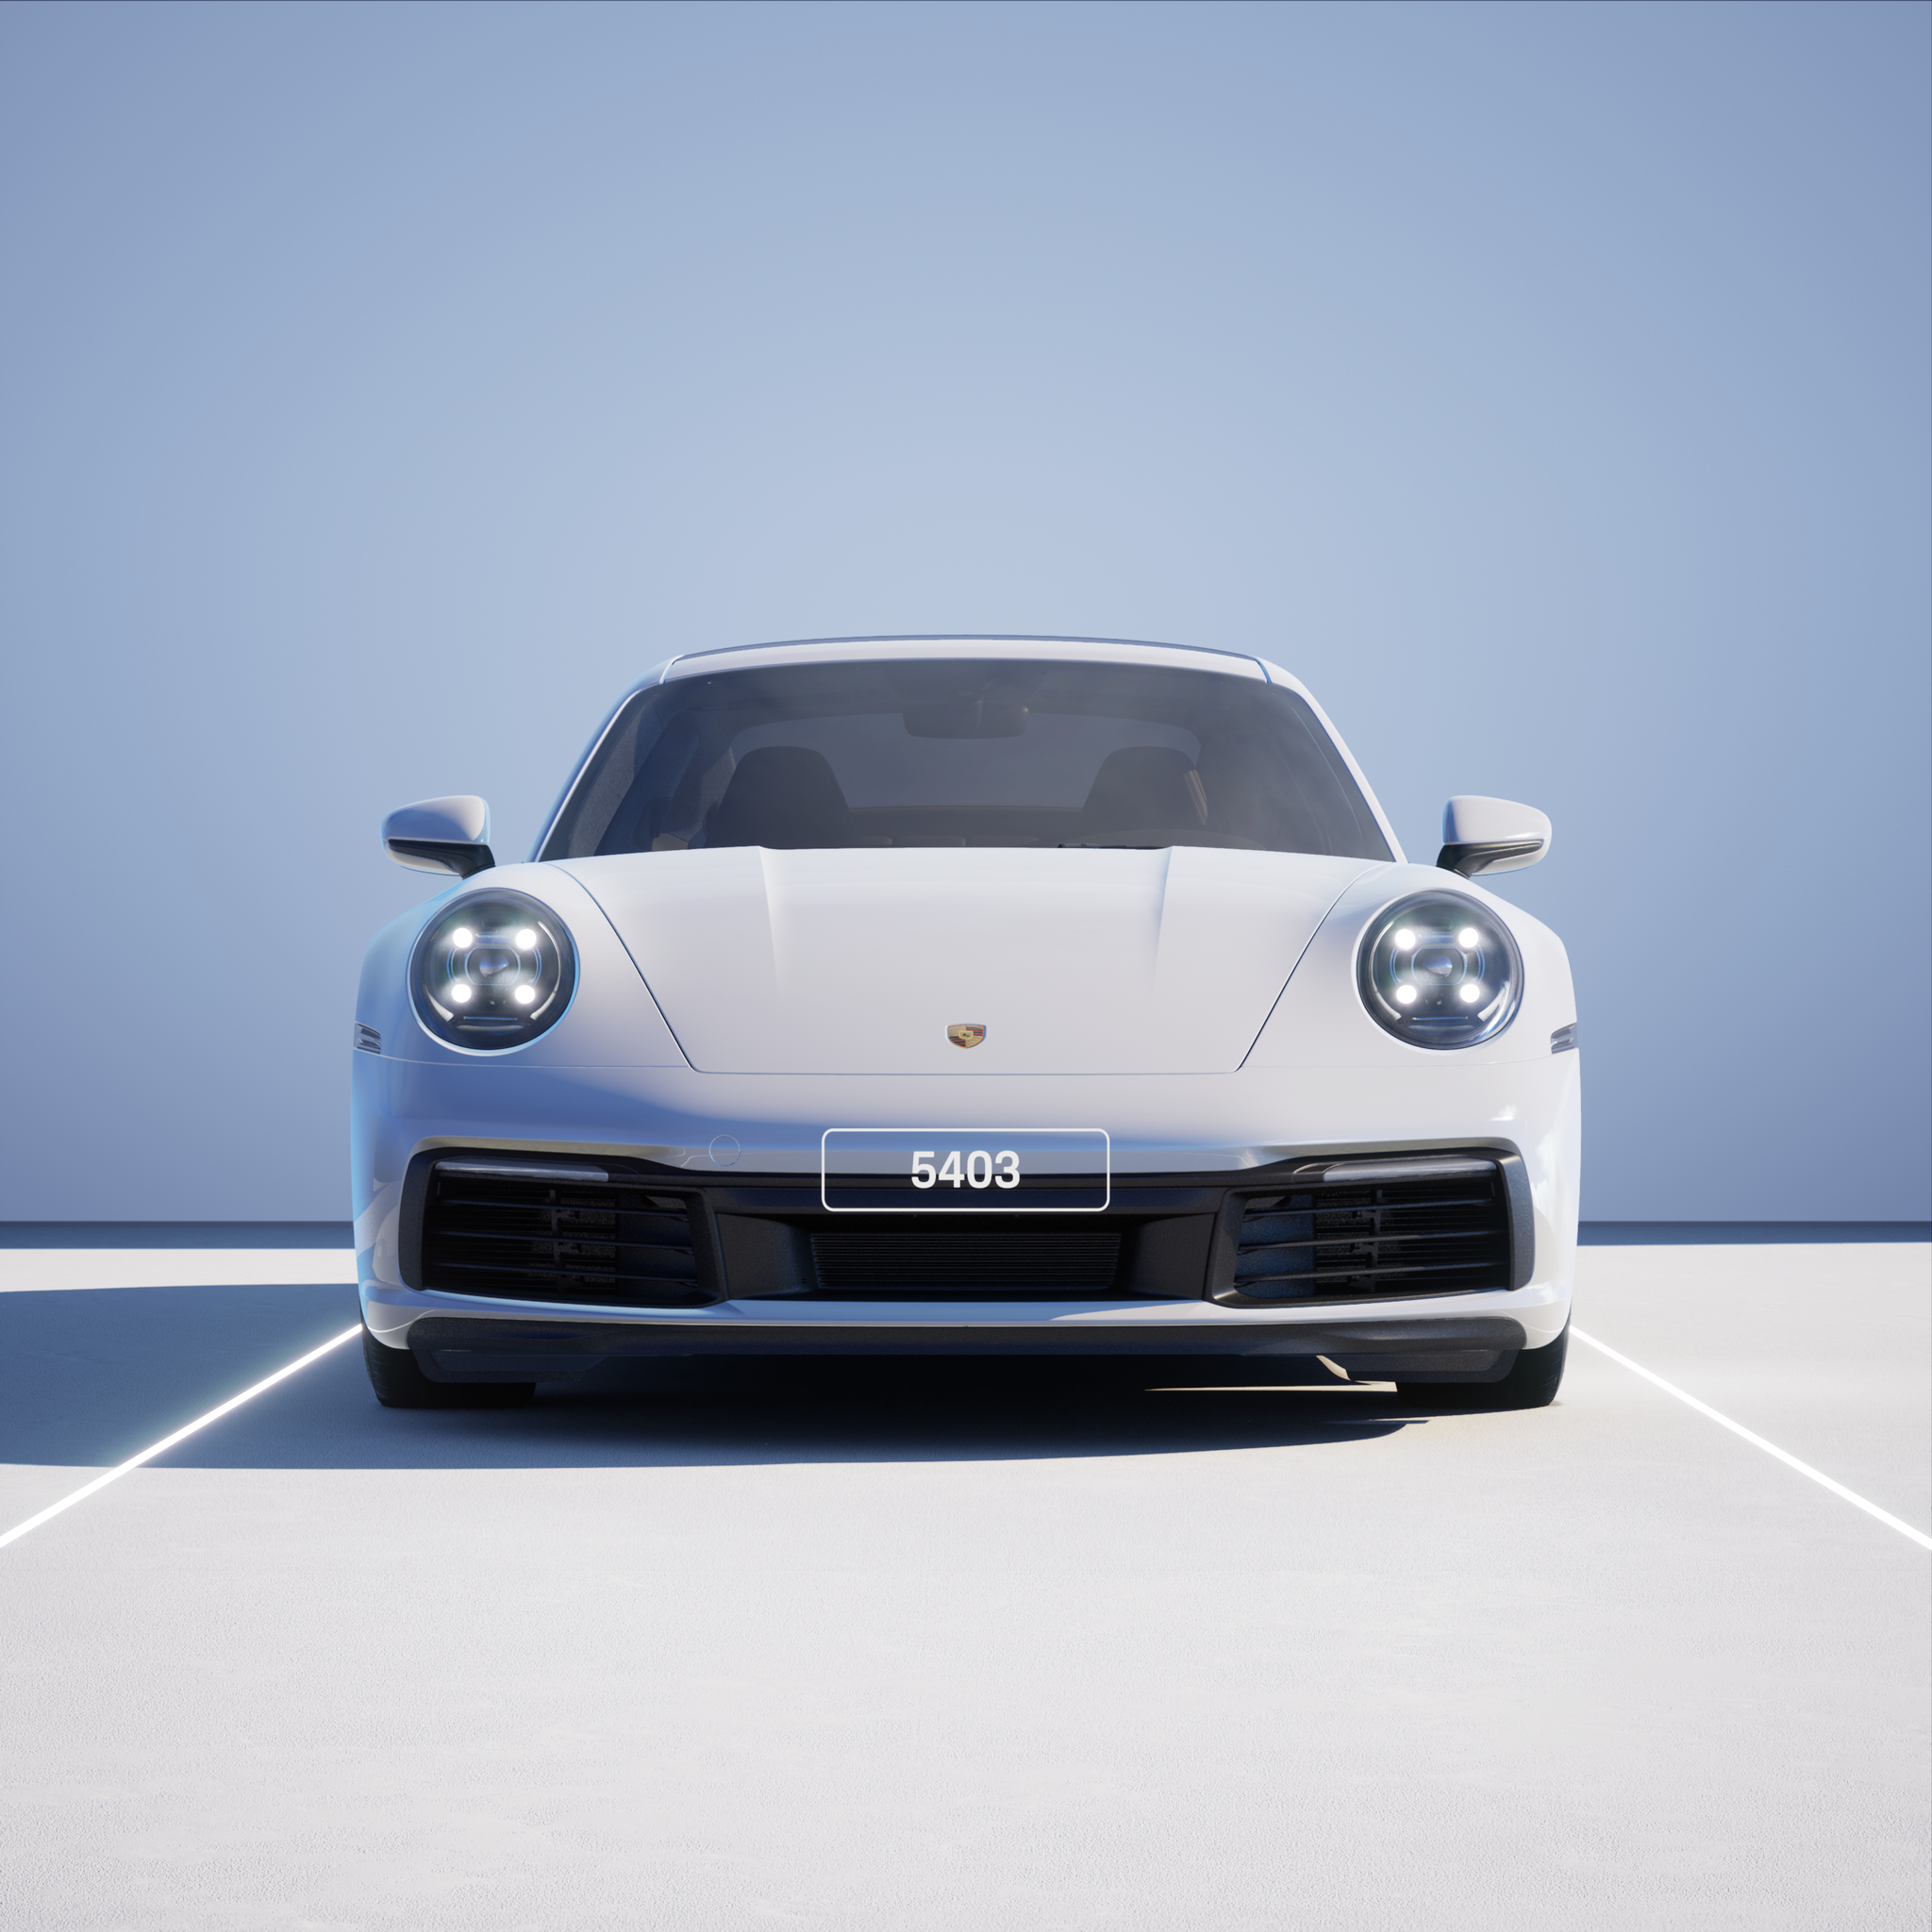 The PORSCHΞ 911 5403 image in phase